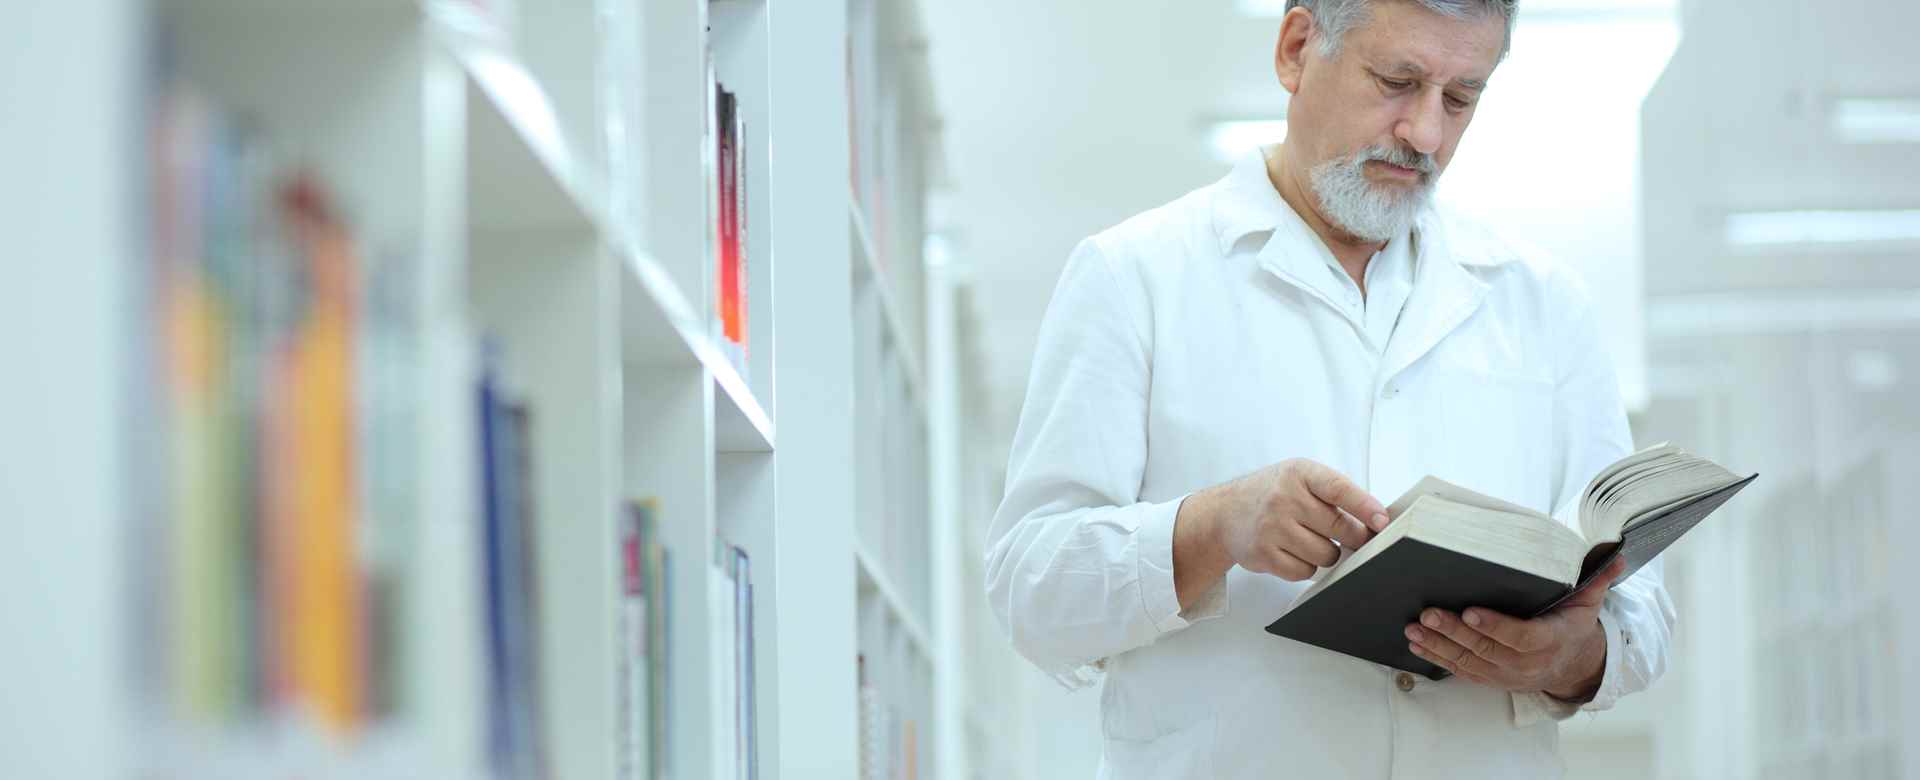 Improving the Quality of Healthcare [Whitepaper]